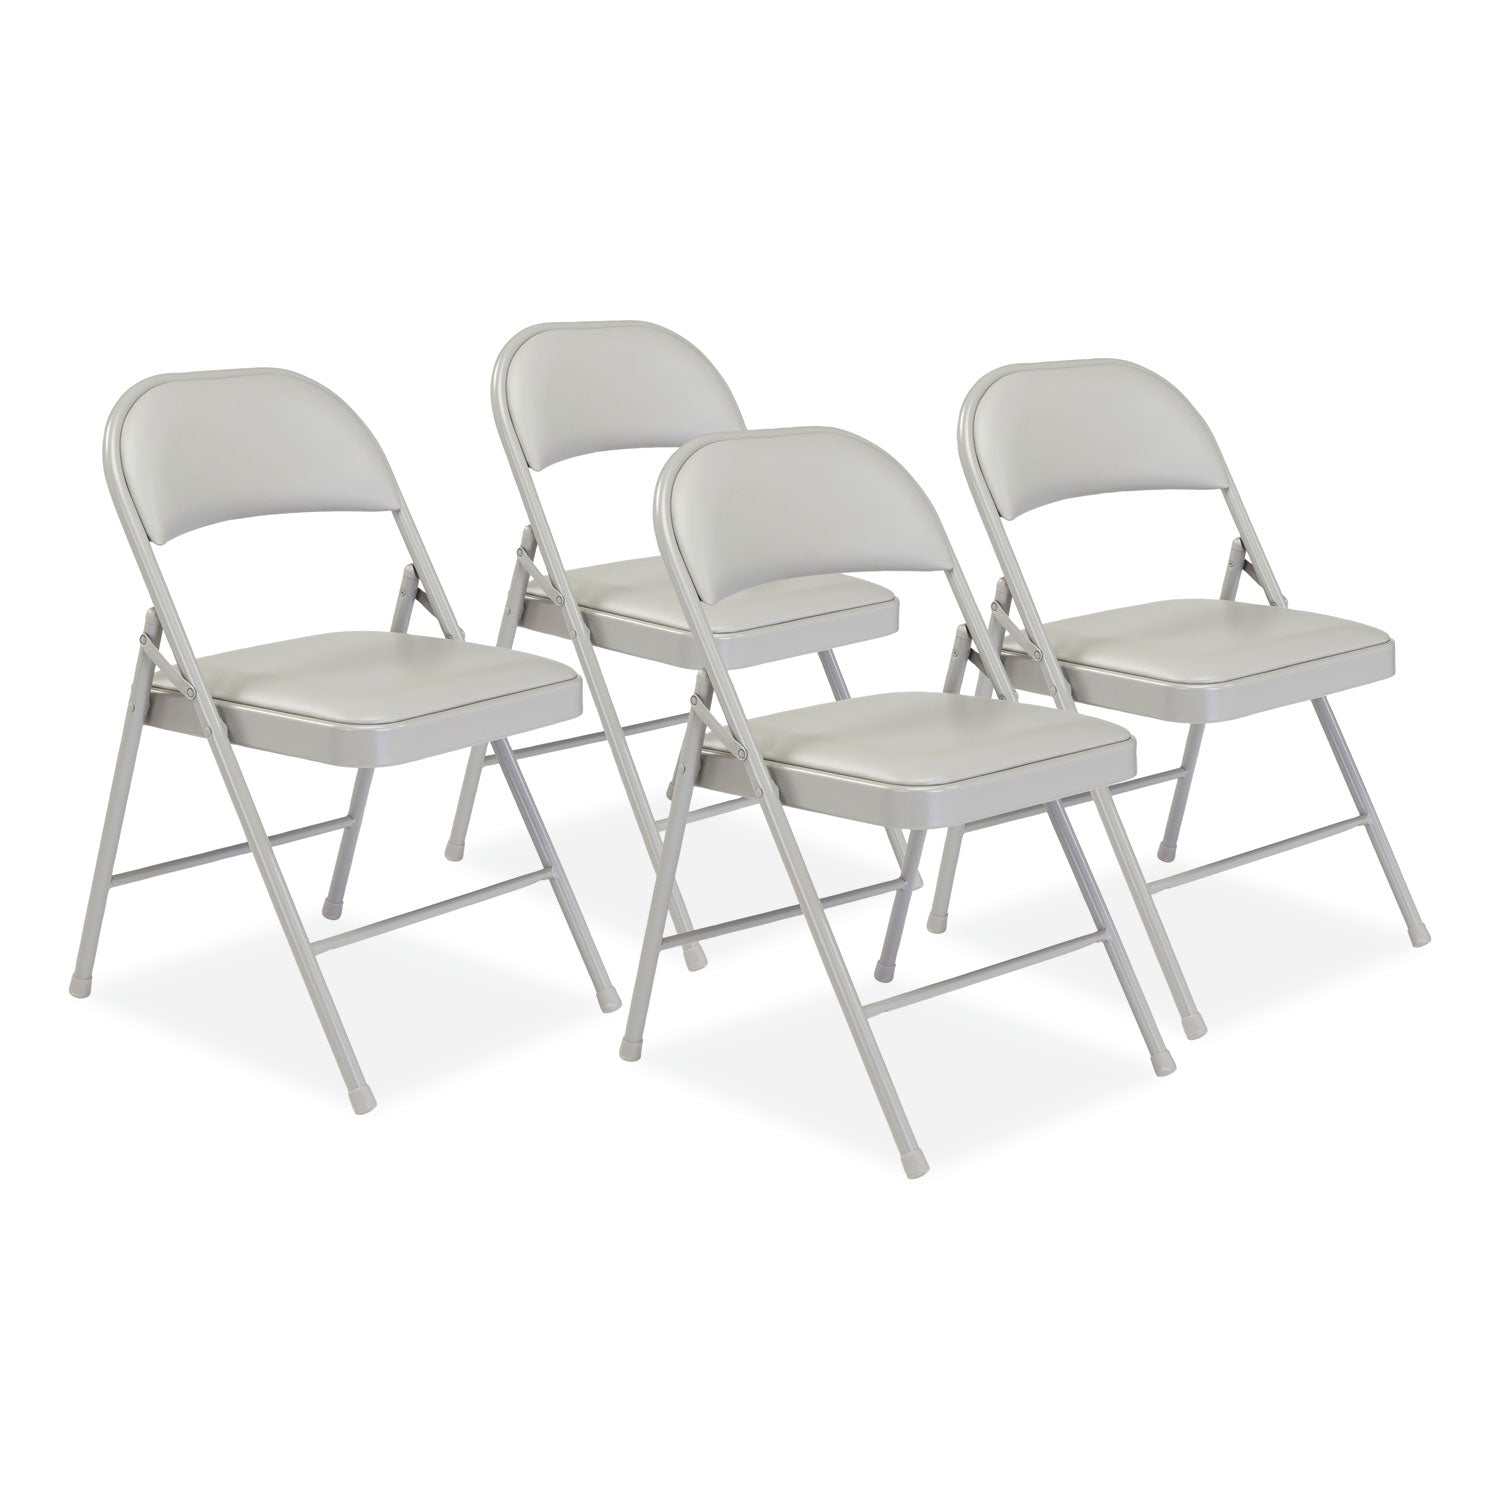 950-series-vinyl-padded-steel-folding-chair-supports-up-to-250-lb-1775-seat-height-gray-4-carton-ships-in-1-3-bus-days_nps952 - 1